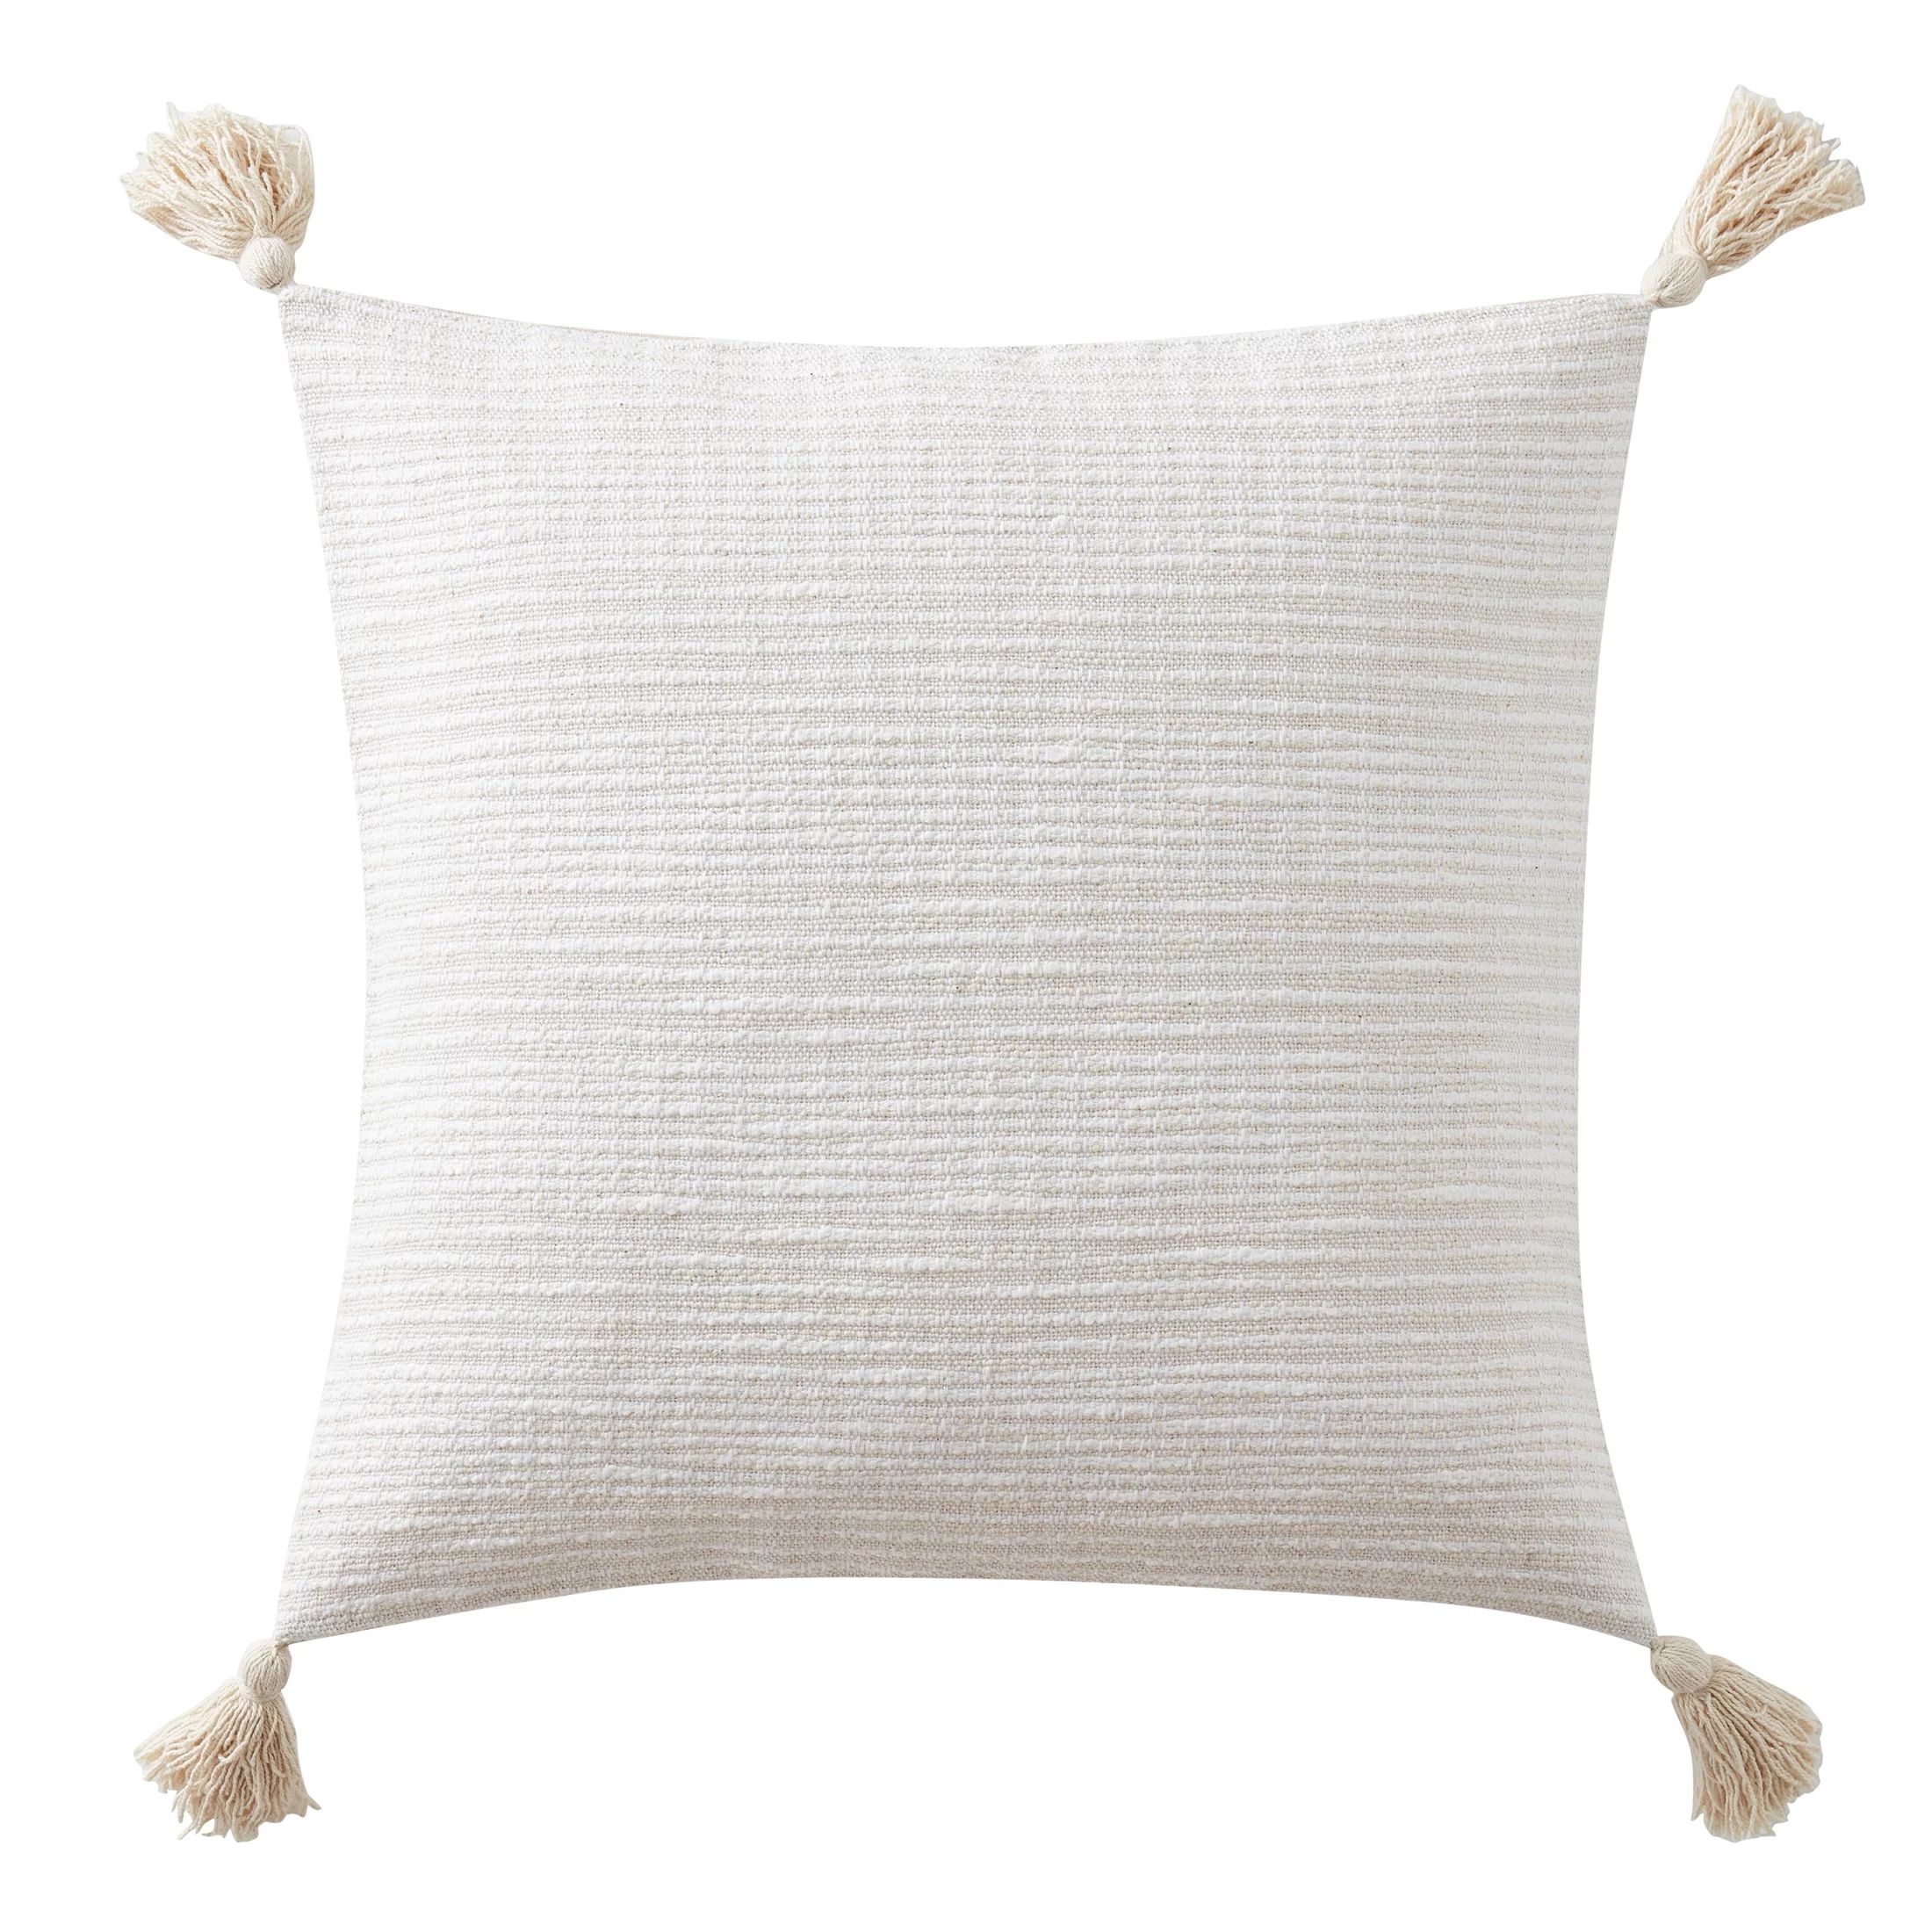 My Texas House Aster Woven Tassel Square Decorative Pillow Cover, 22" x 22", Ivory | Walmart (US)